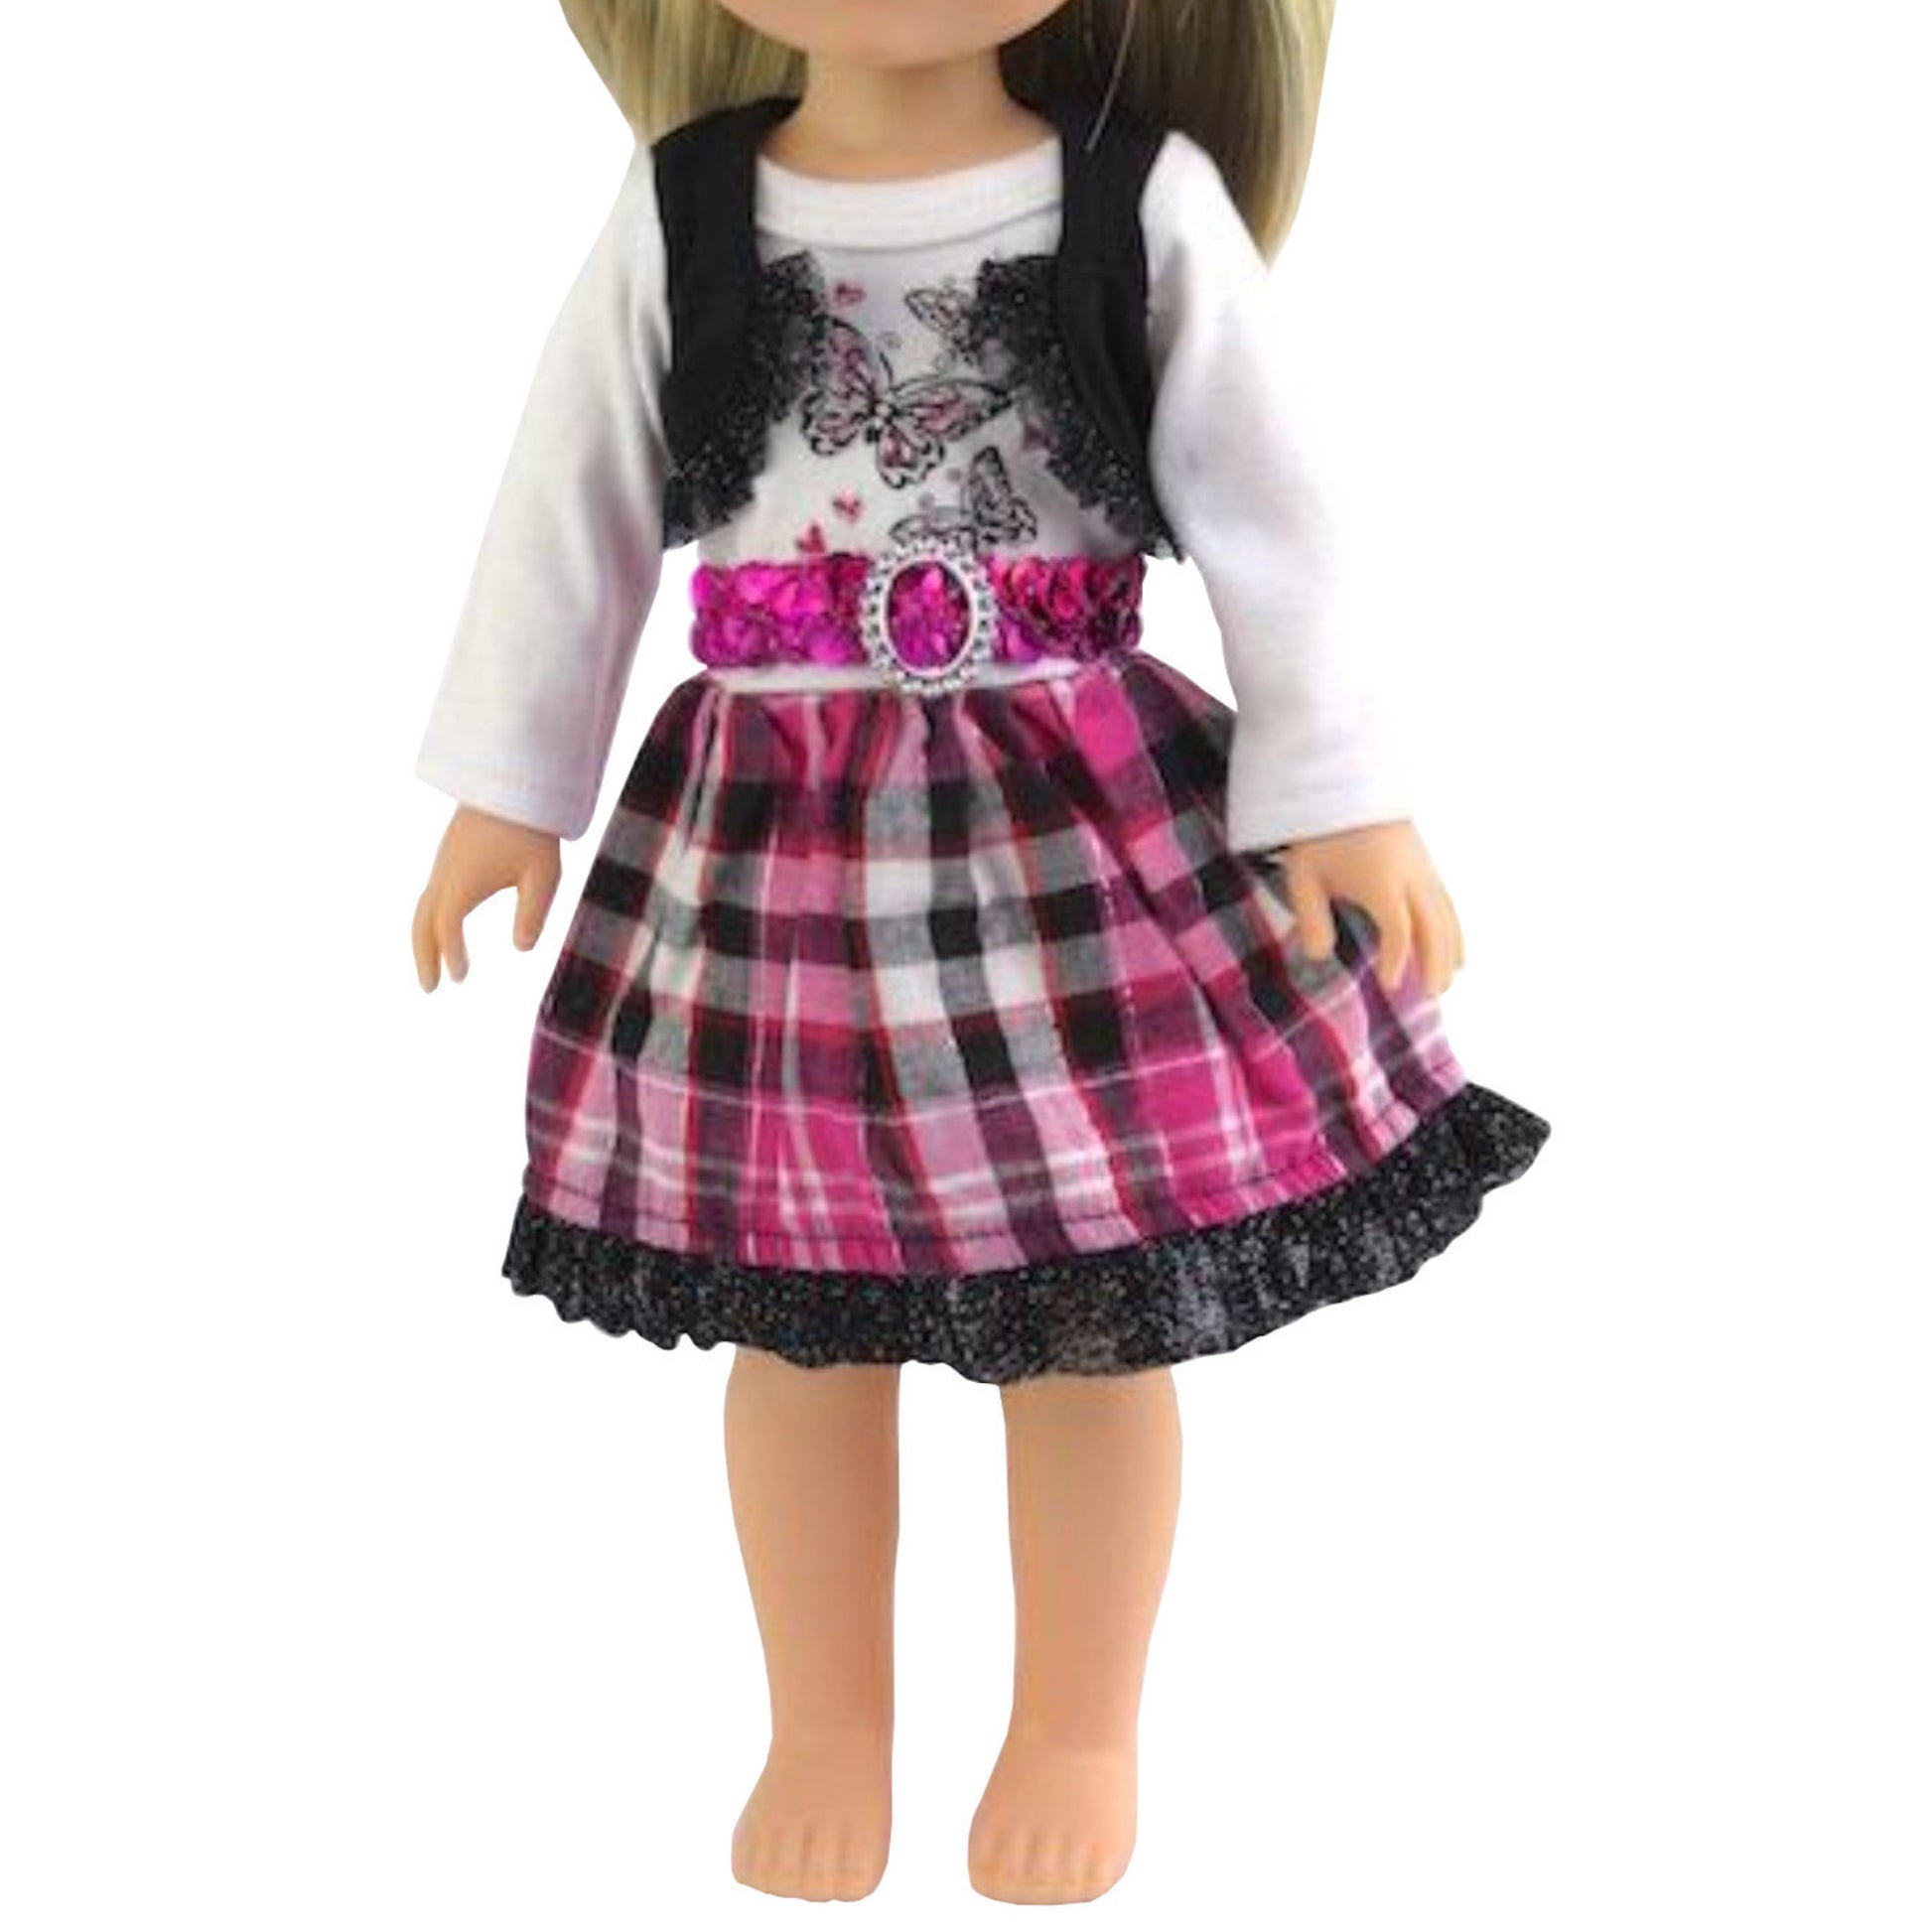 Butterfly Dress for 14 1/2-inch dolls with doll